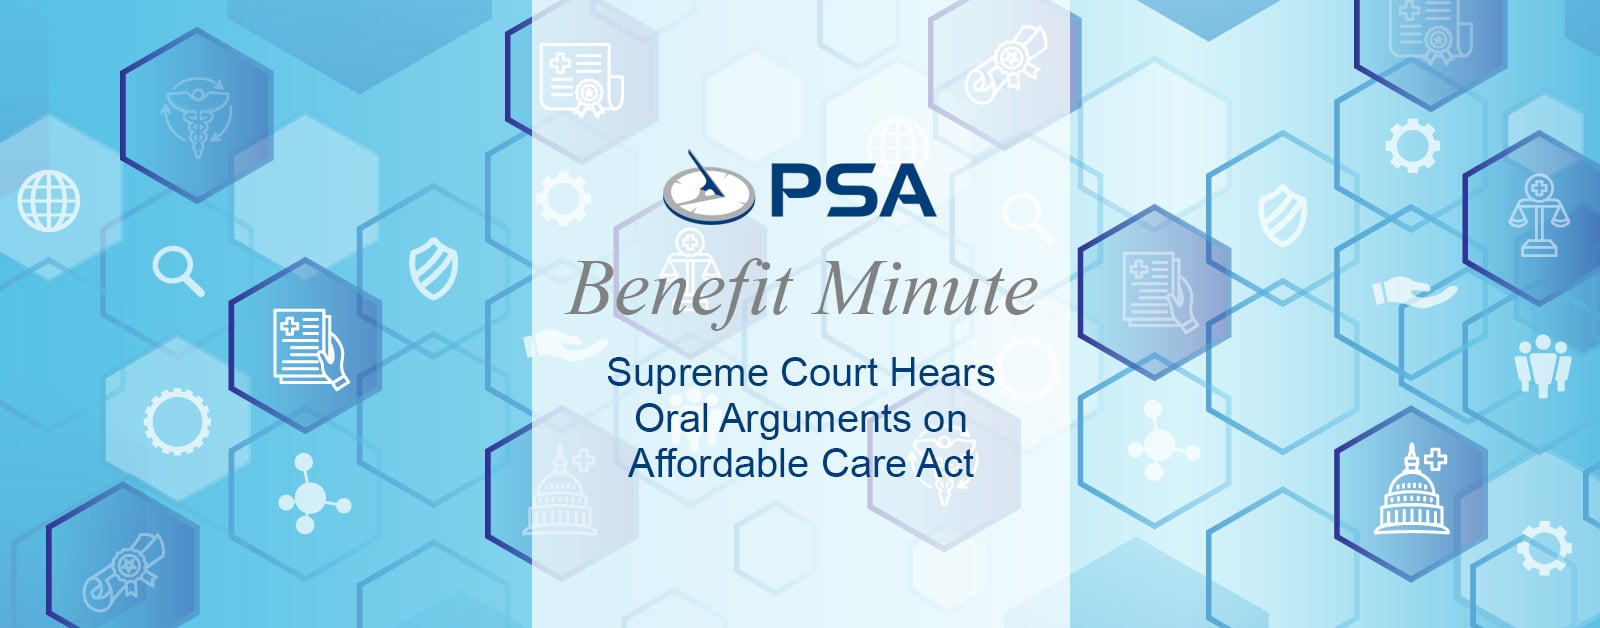 Image reading "Benefit Minute" on PSA Financial's website